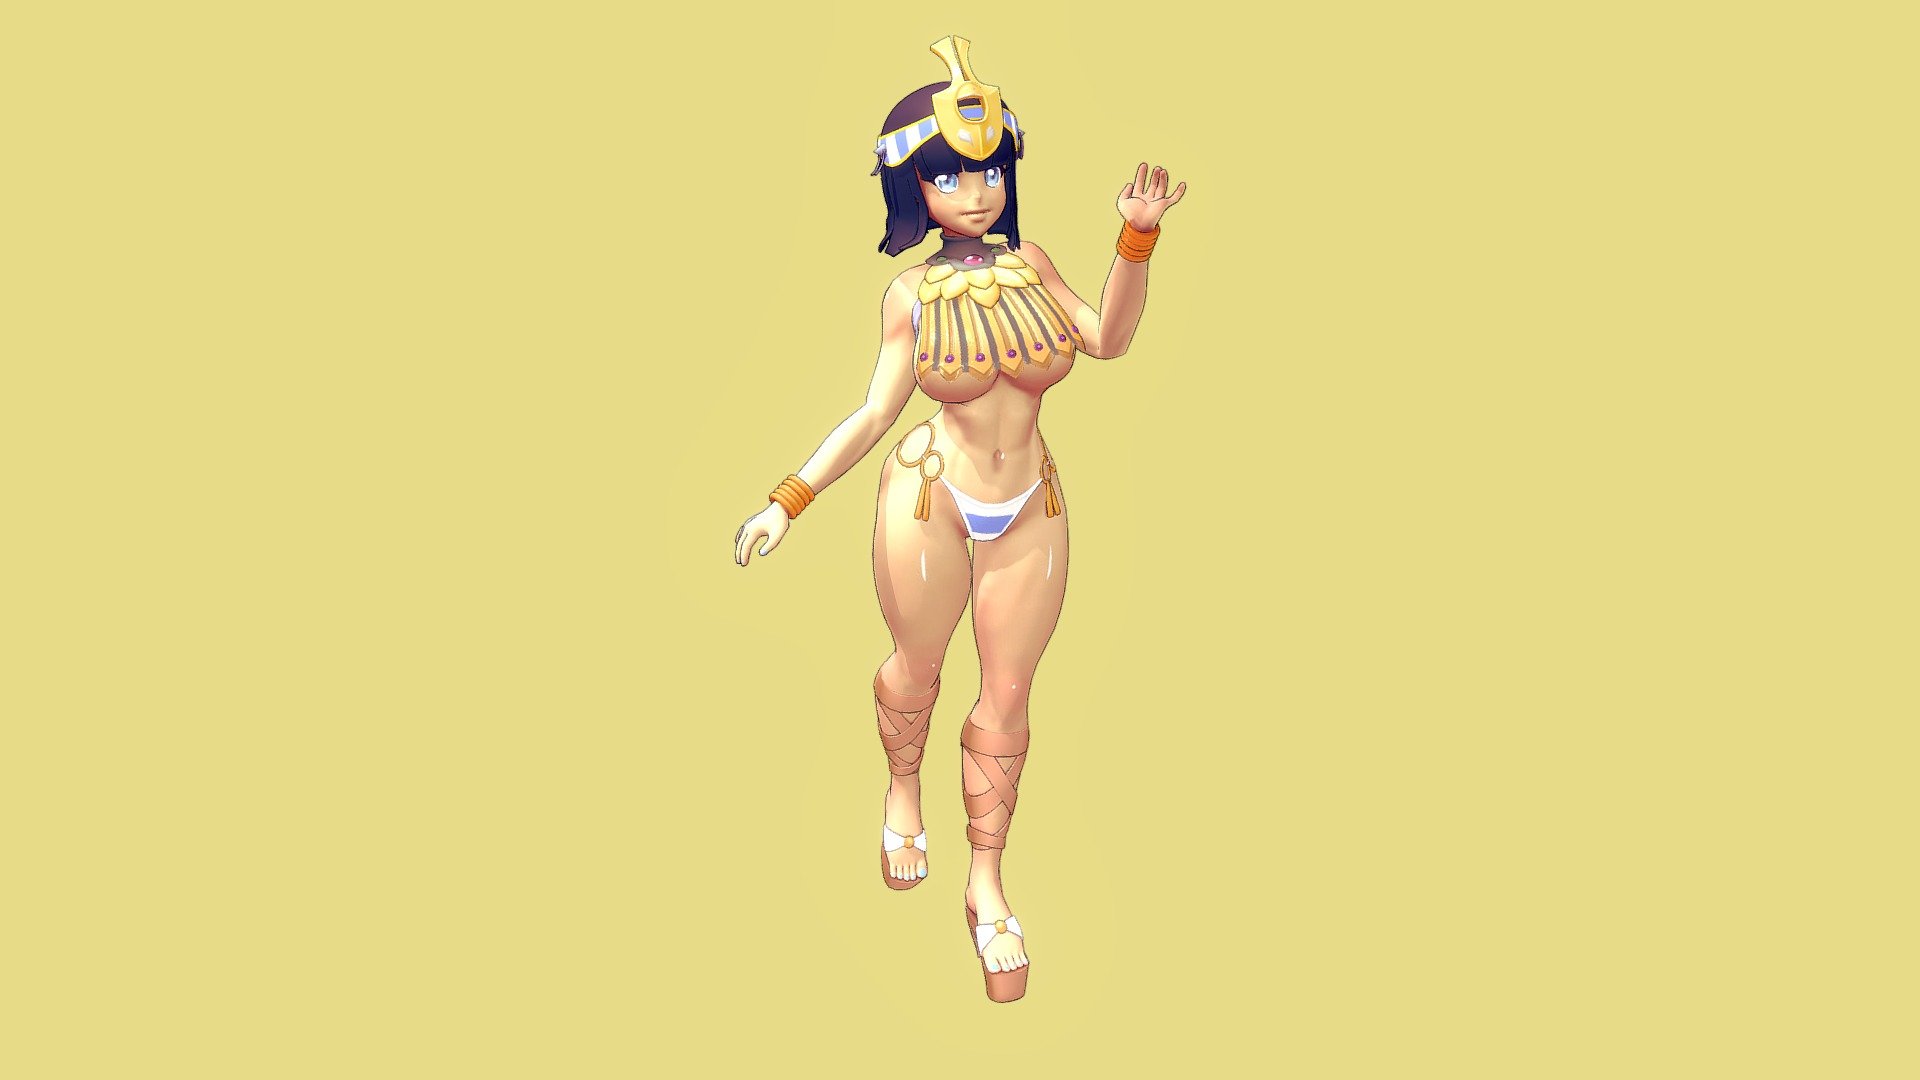 Menace from Queen's Blade Unlimited

Download link coming soon! - Menace (Queen's Blade) - 3D model by jeremyyysan 3d model